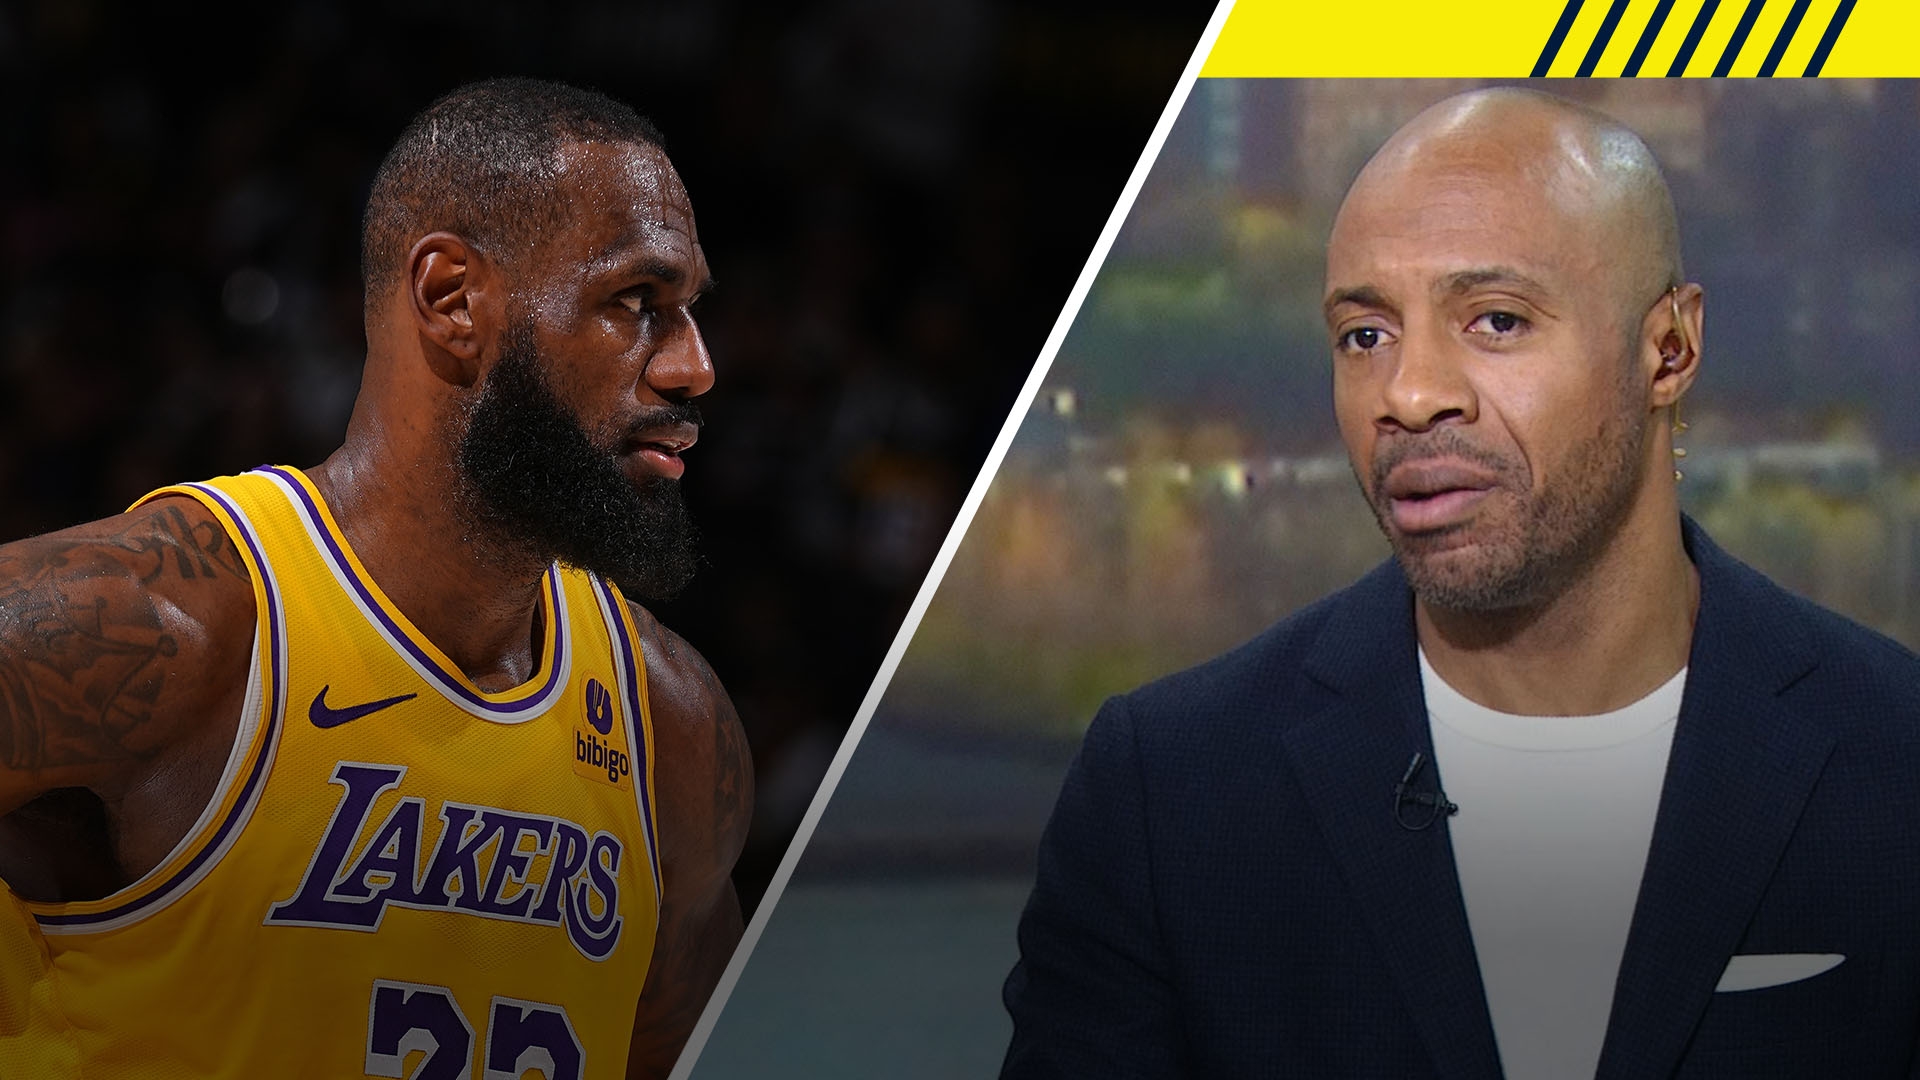 Jay Williams on LeBron's replay opinion: 'No one cares'